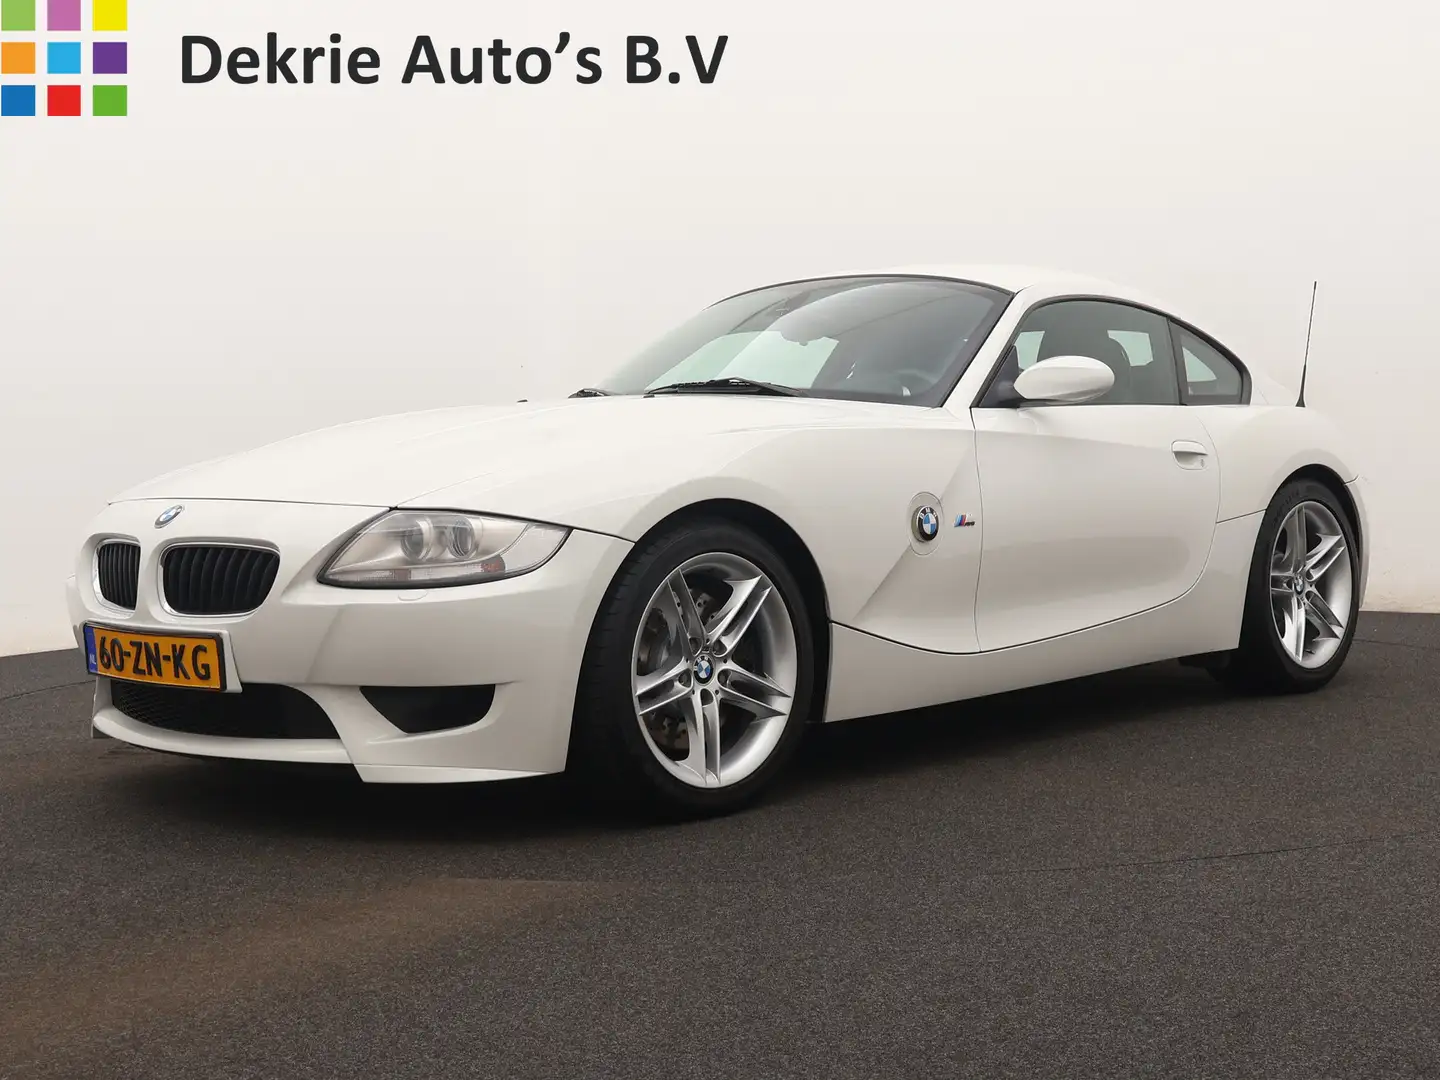 BMW Z4 Coupé 3.2 M 343PK / Airco / Cruise-ctr. / Leder in Wit - 1